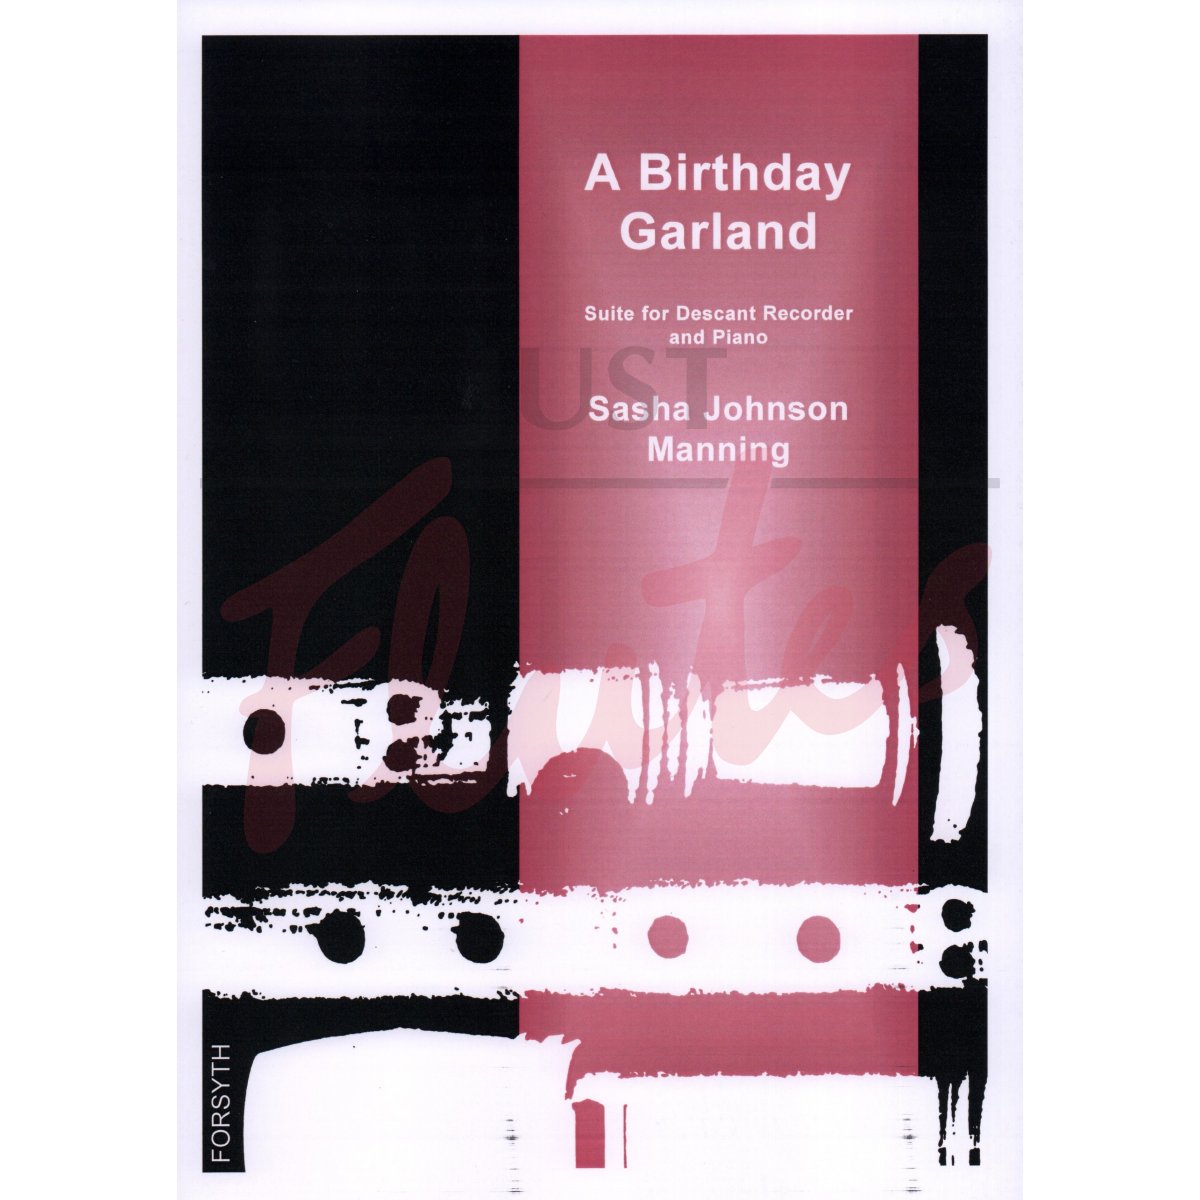 A Birthday Garland for Descant Recorder and Piano